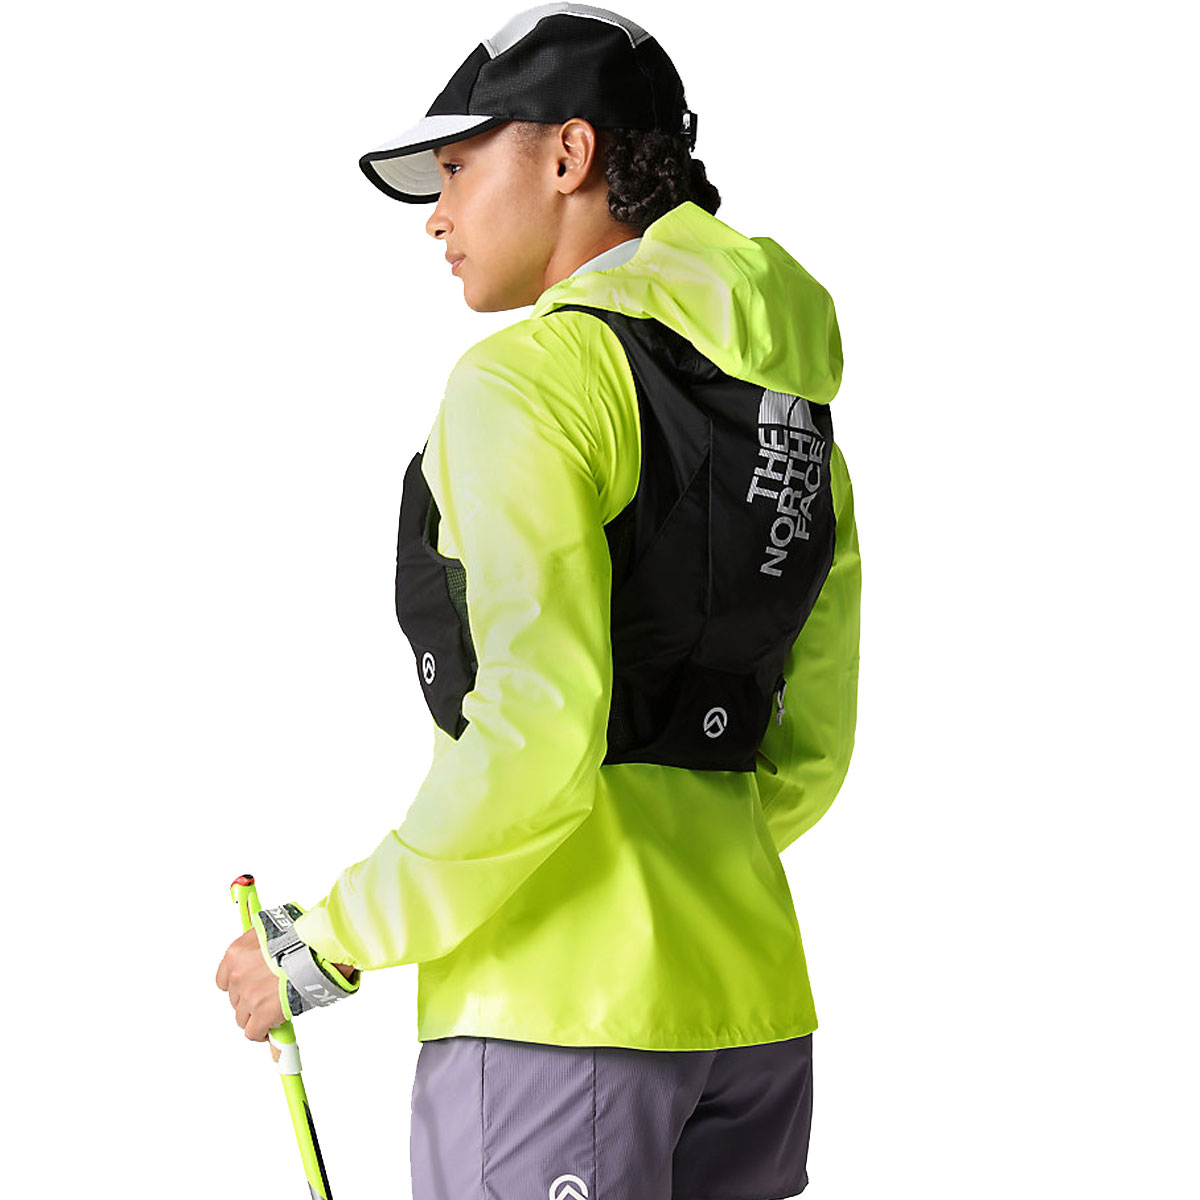 THE NORTH FACE - SUMMIT RUN TRAINING PACK 12L